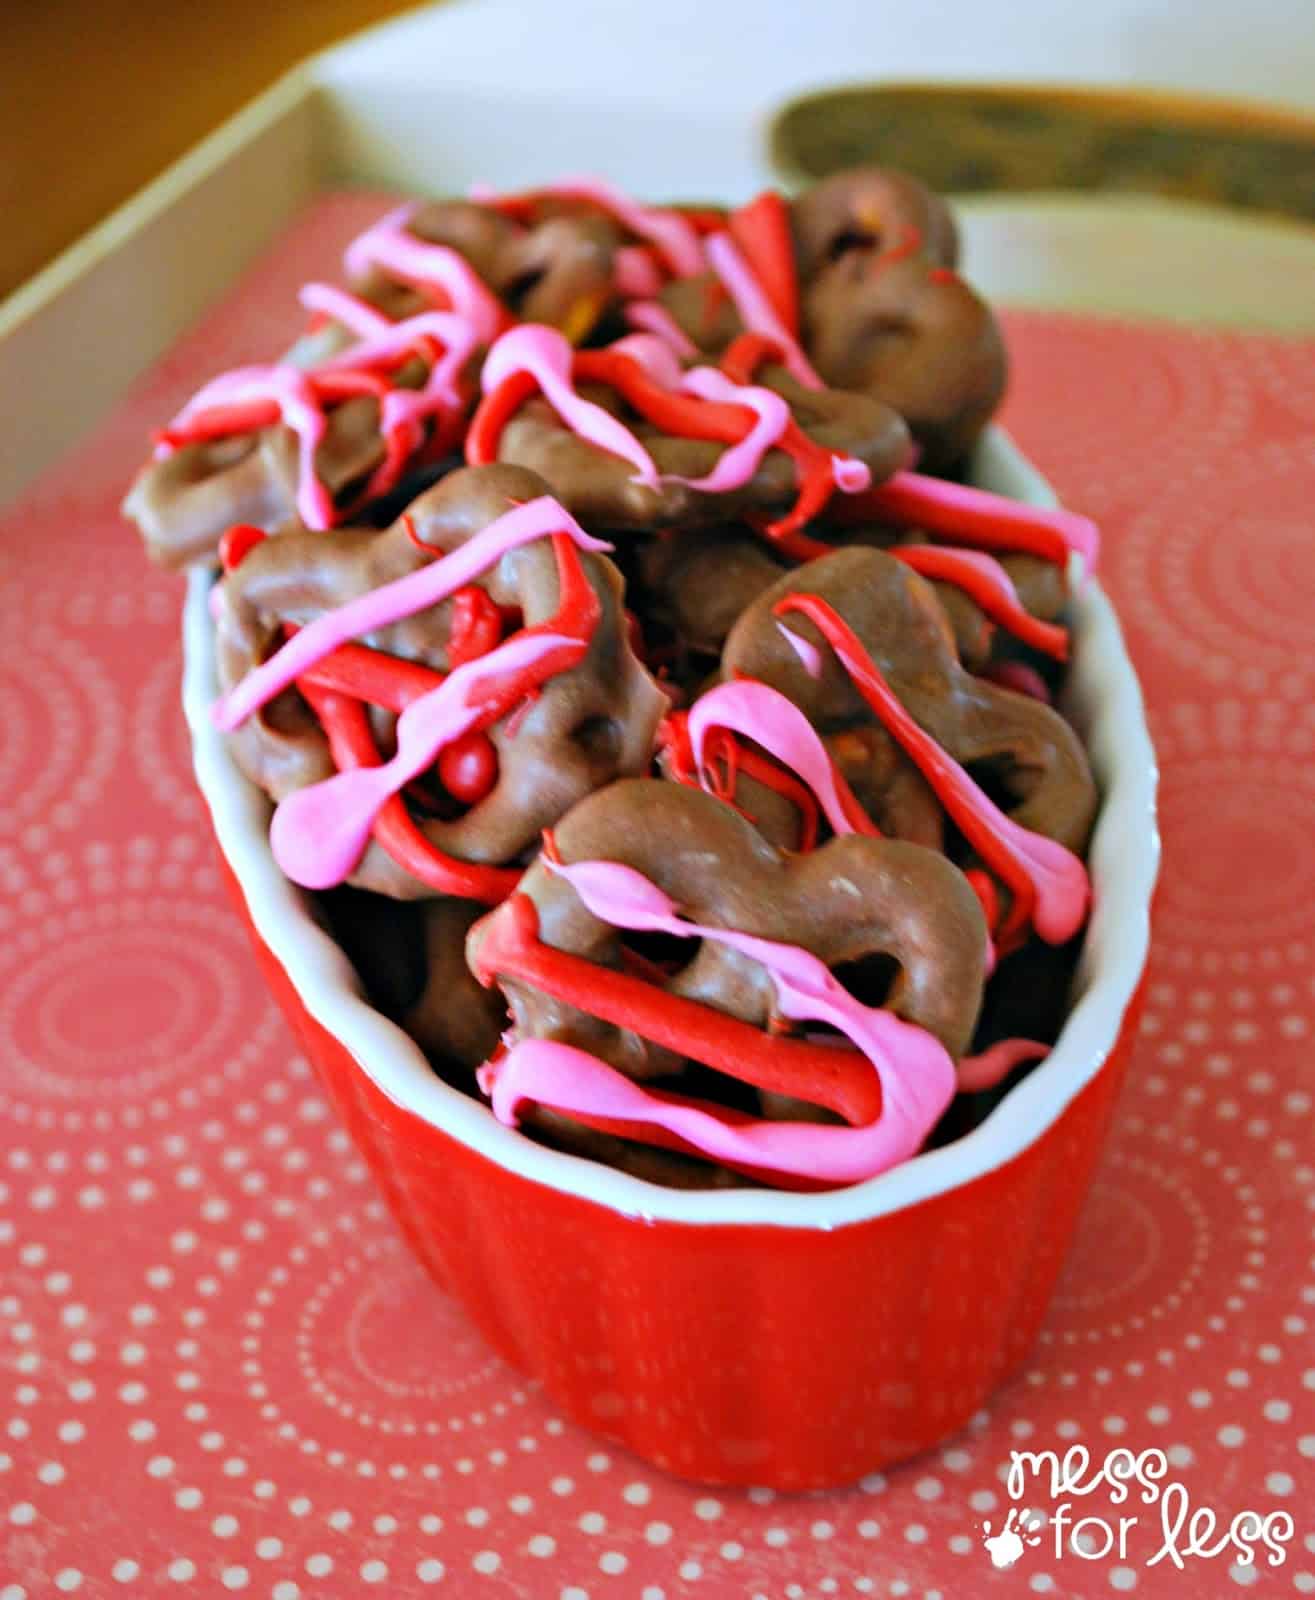 How To Make Chocolate Covered Pretzels for Valentine's Day - These are simple to make a so delicious and addicting!